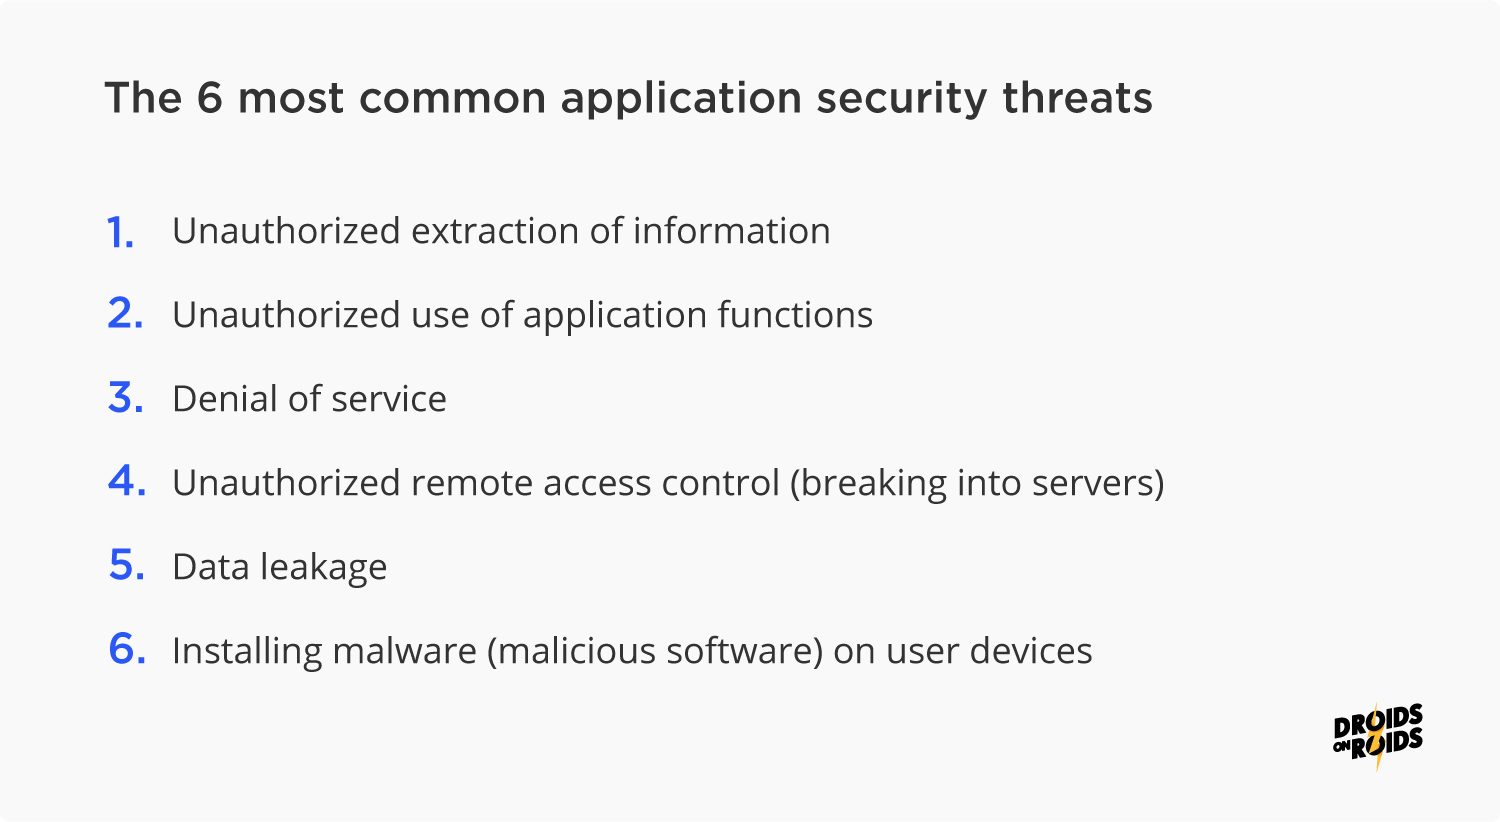 Common application security threats